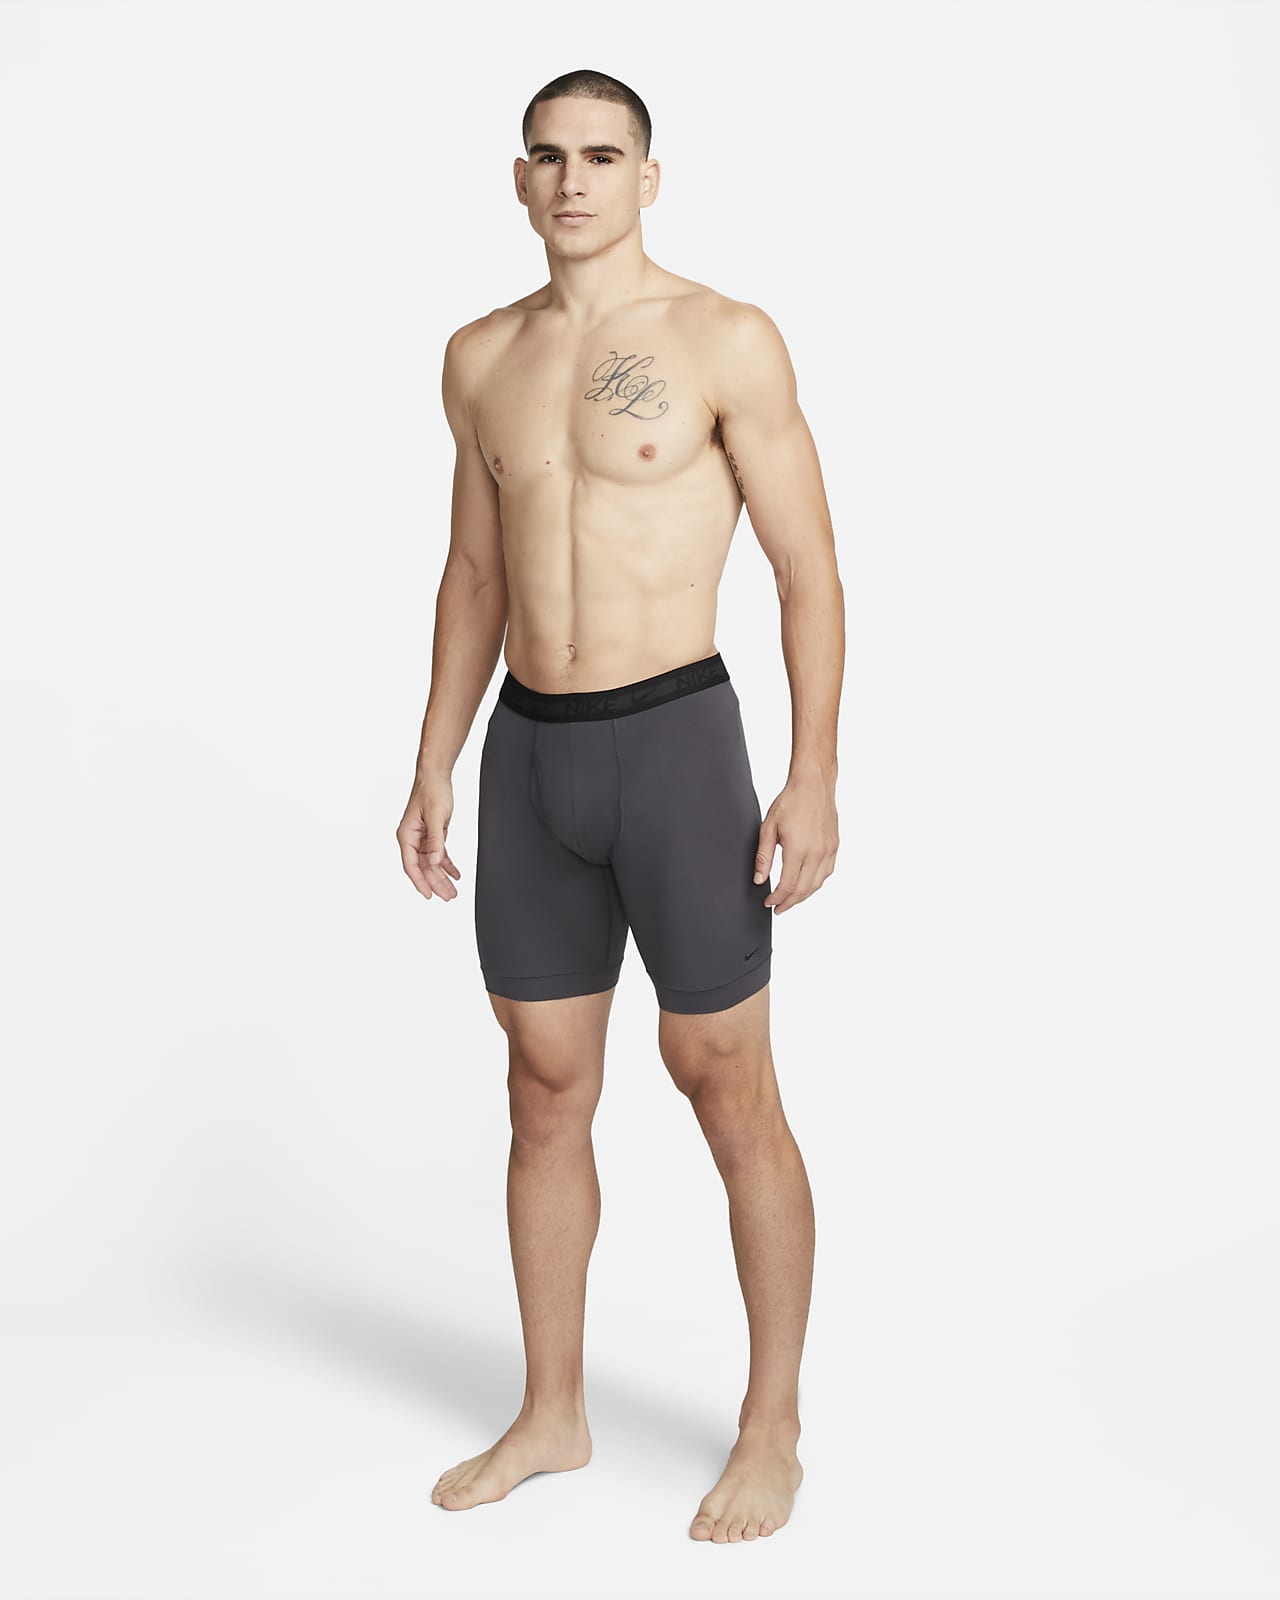 Nike Pro Training boxer briefs in gray